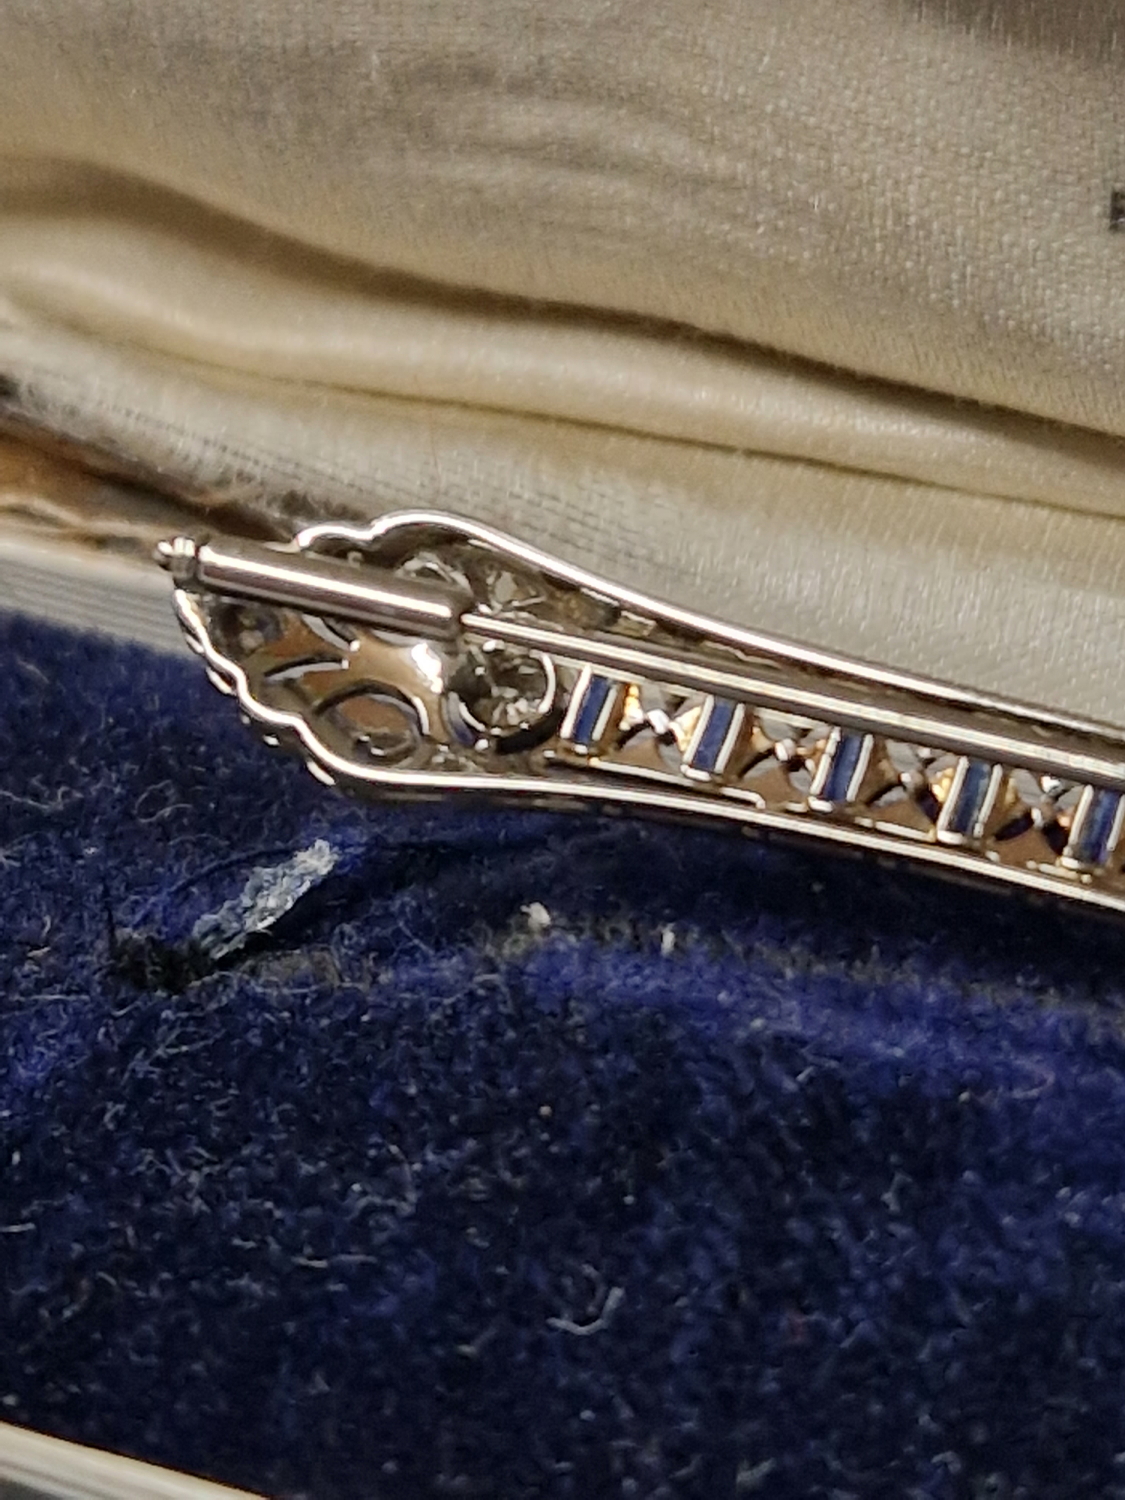 AN ANTIQUE SAPPHIRE AND DIAMOND BAR BROOCH IN PERIOD BOX. - Image 7 of 7